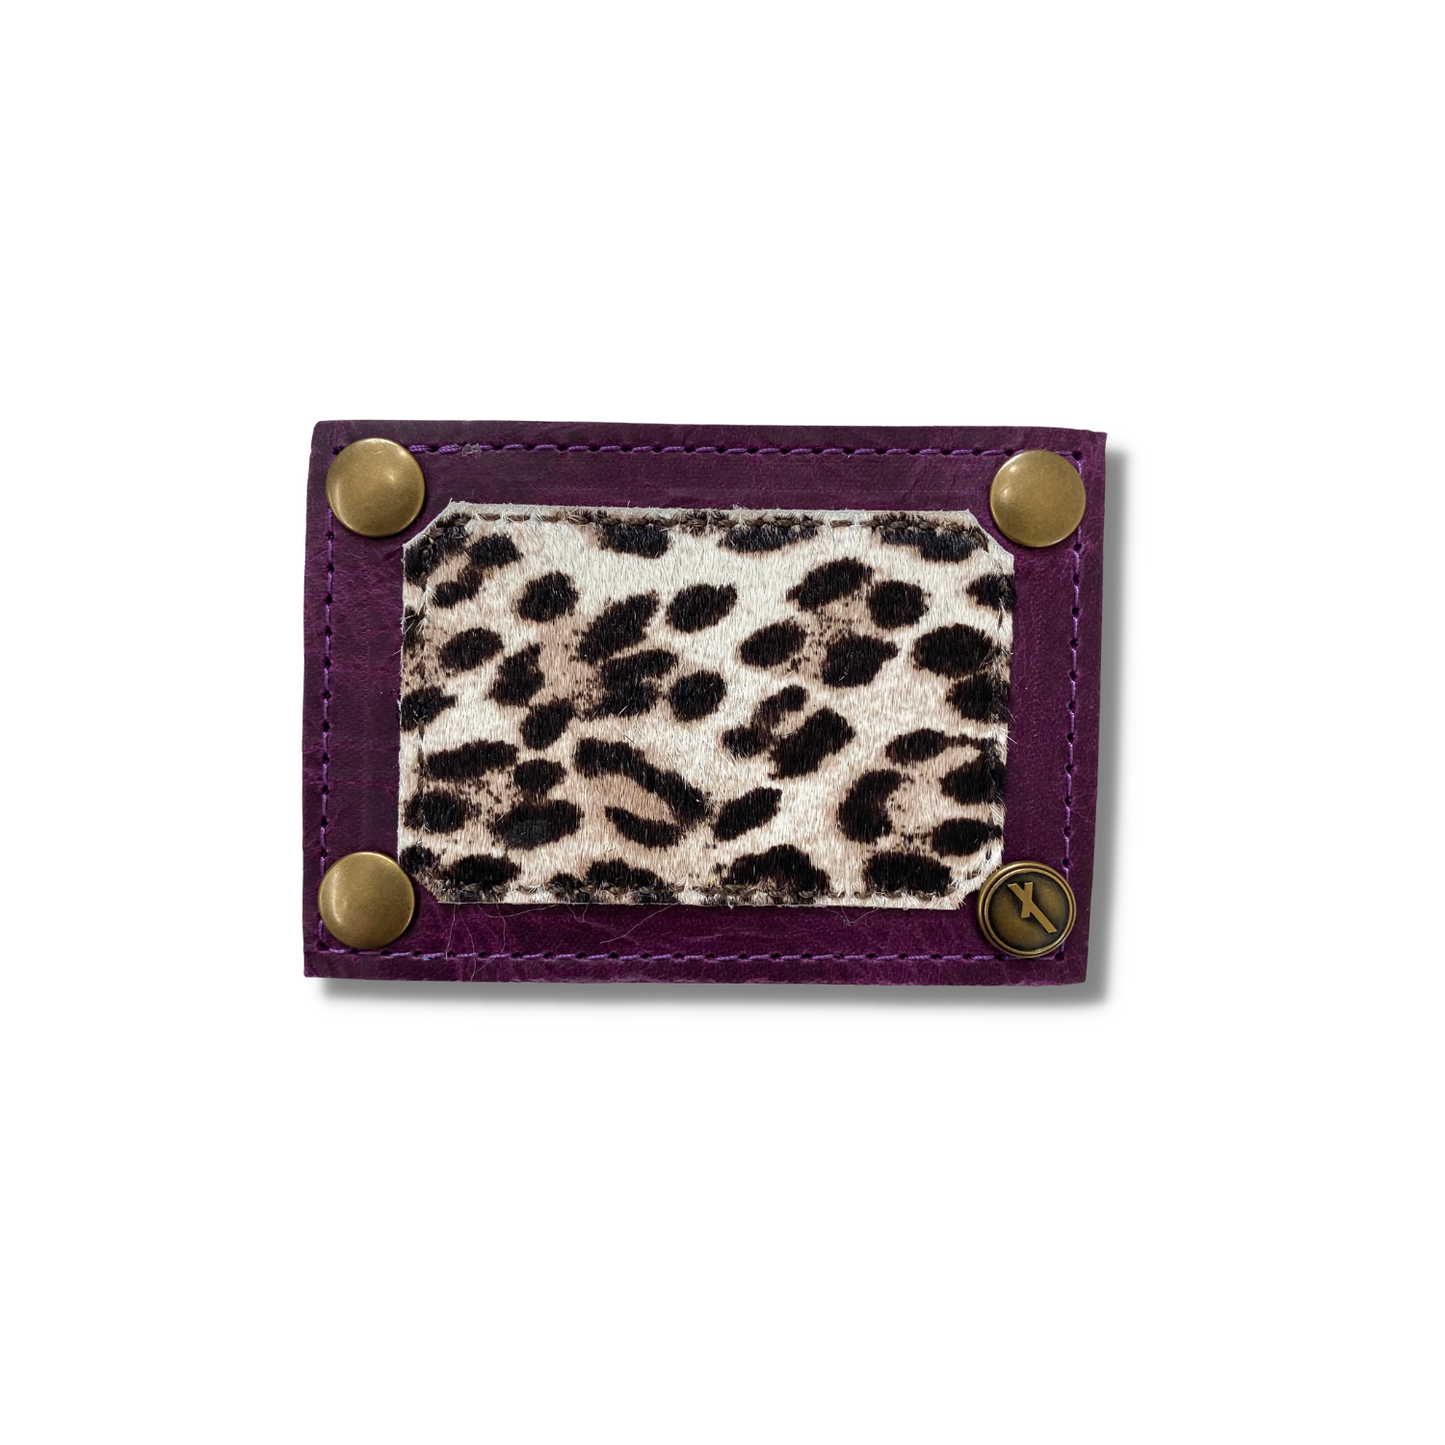 The Leopard Patch